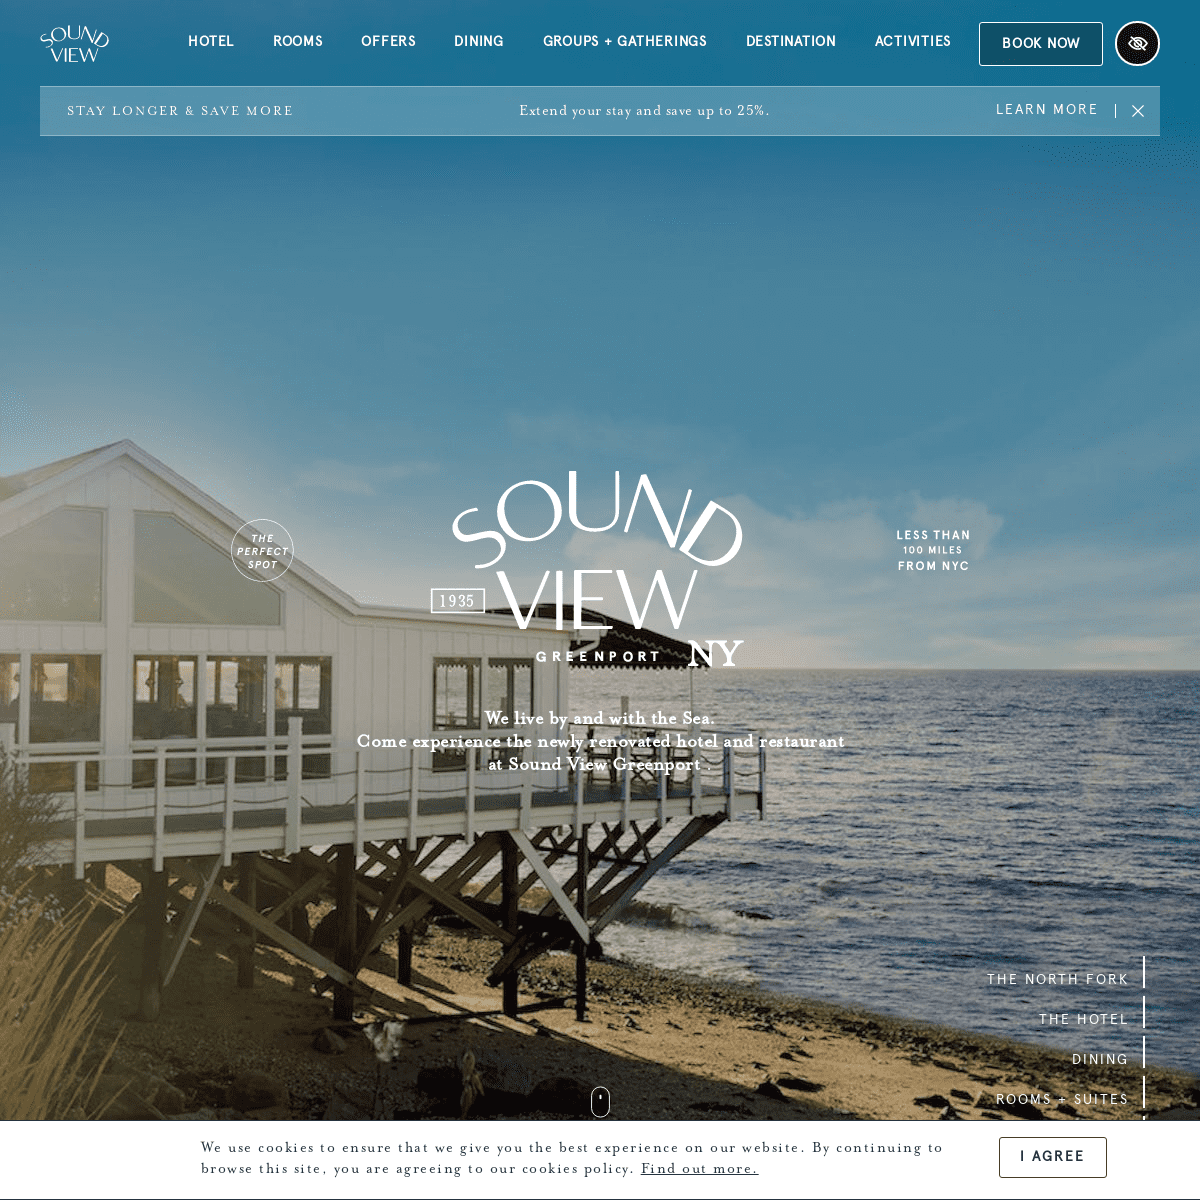 Waterfront North Fork Hotel | Sound View Greenport | Long Island, NY